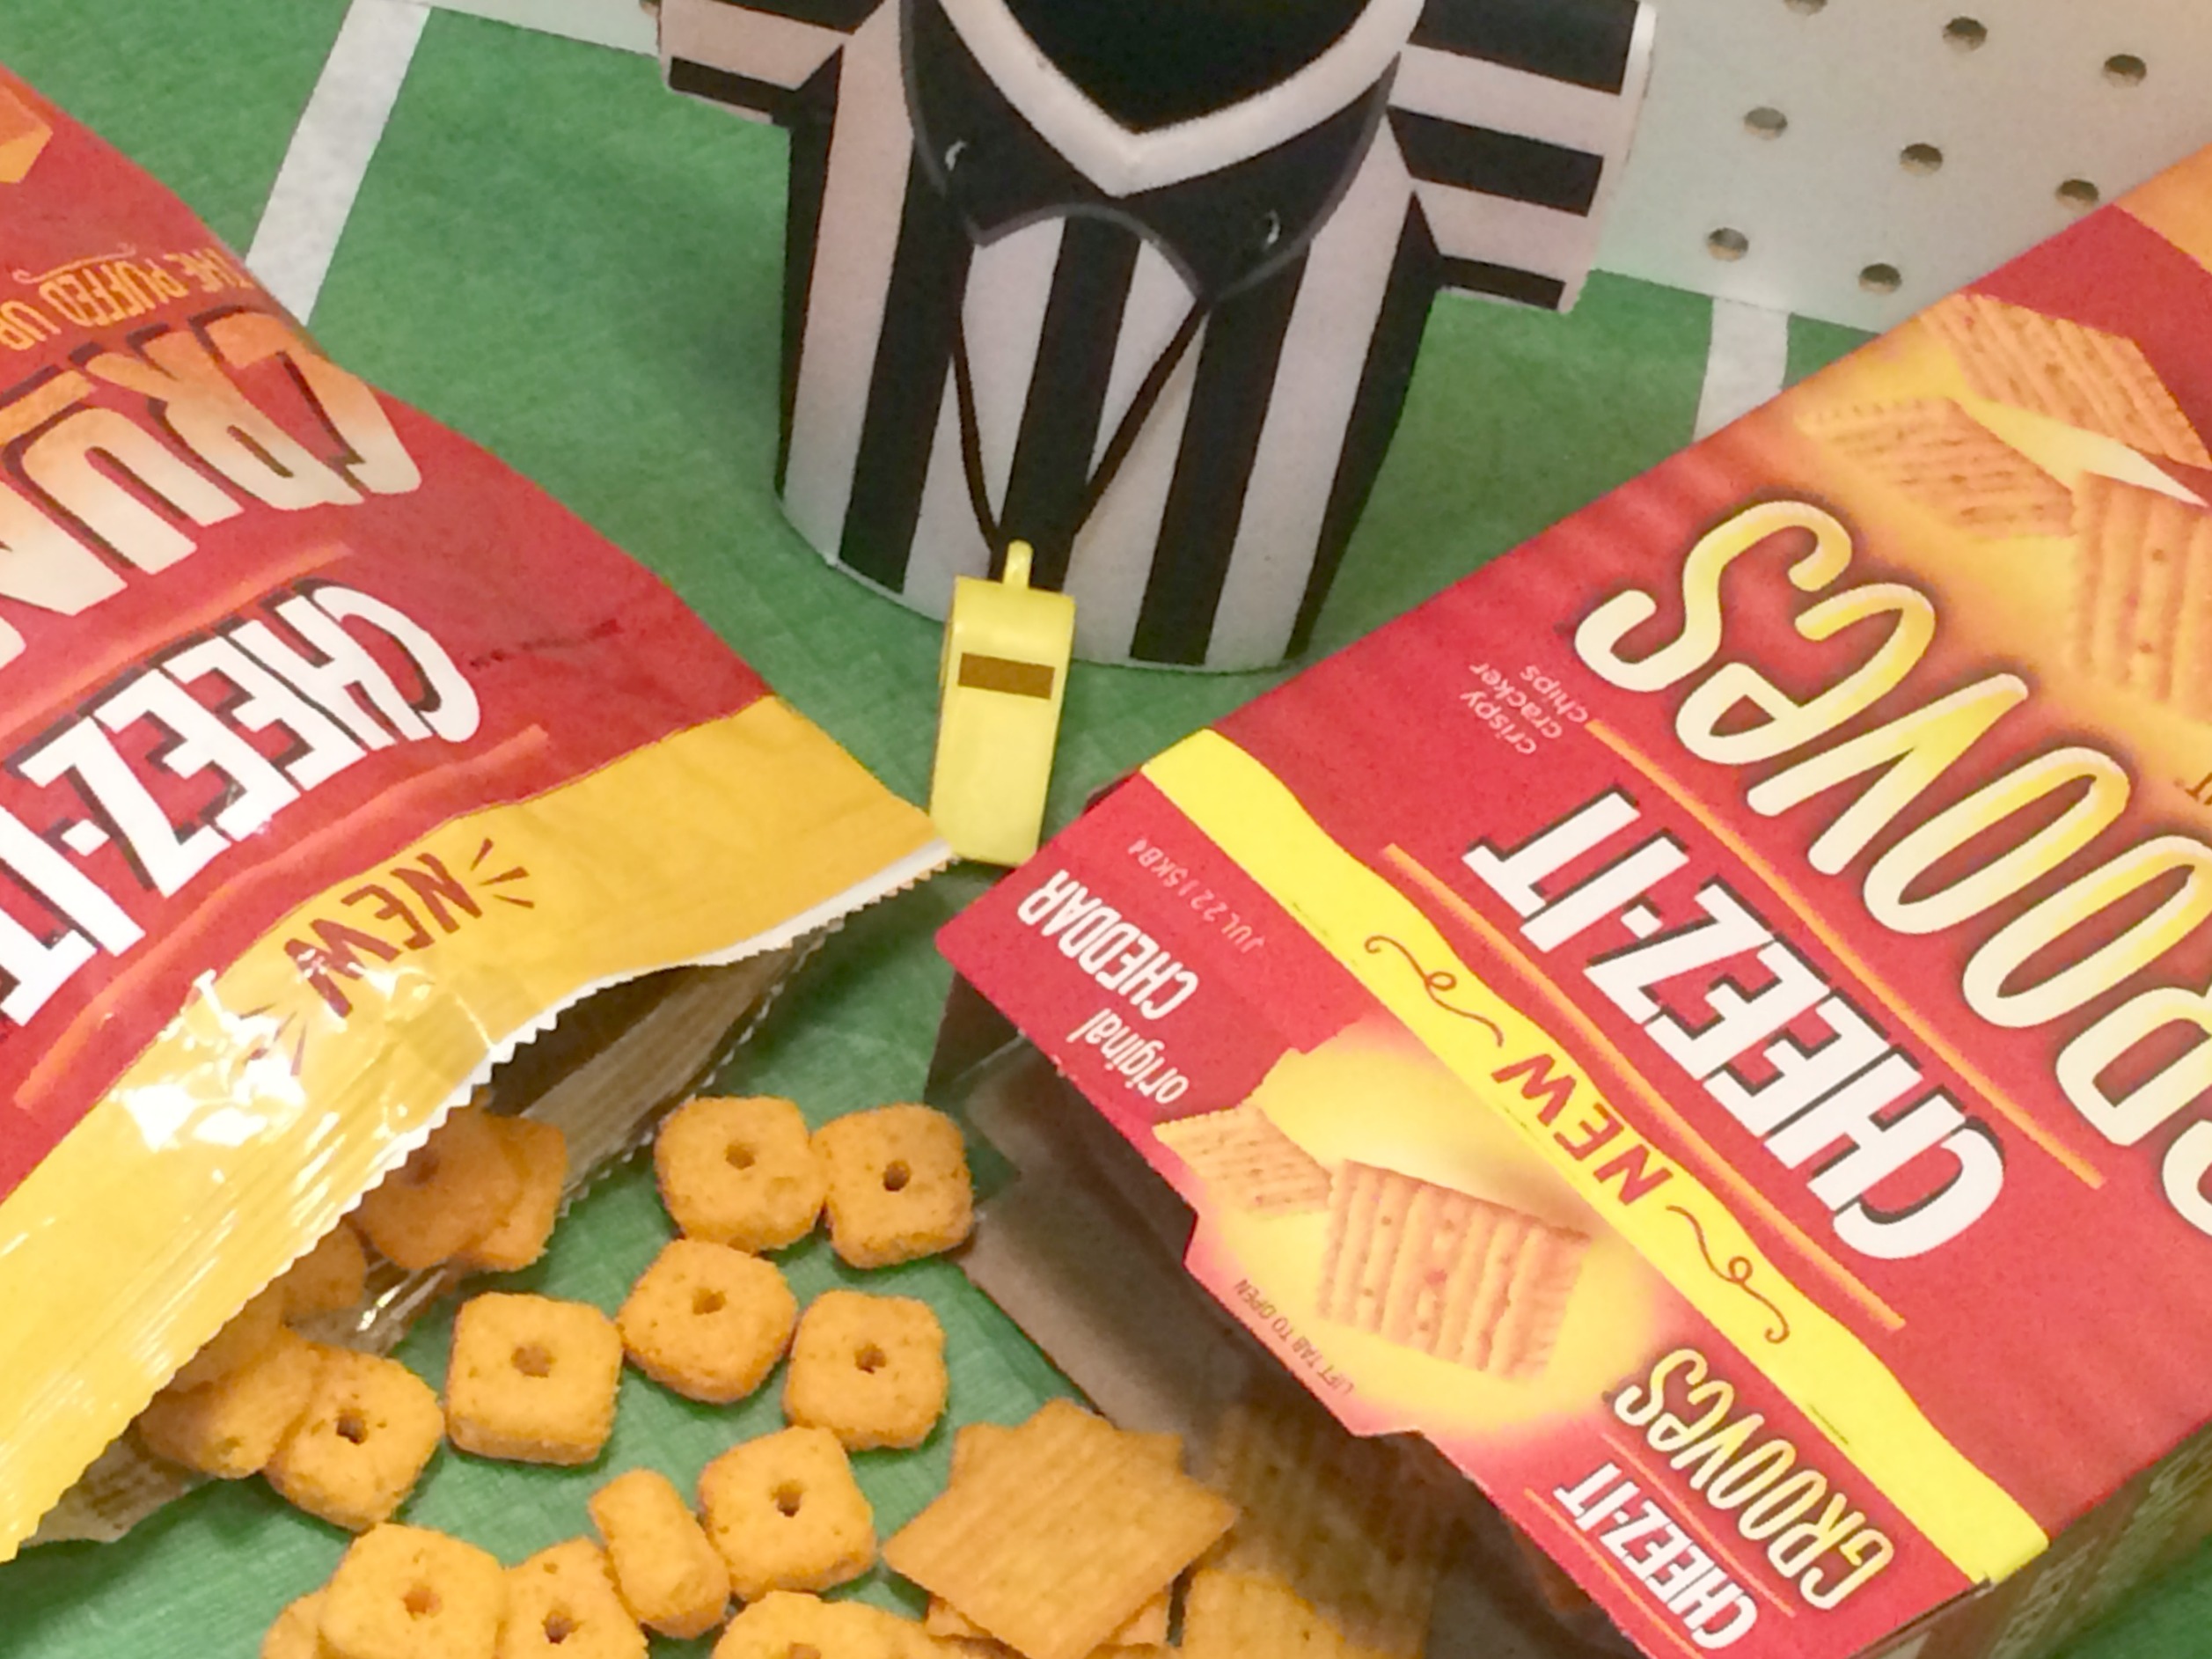 Score Big on Game Day with Cheez-It and Chocolate Dipped Football